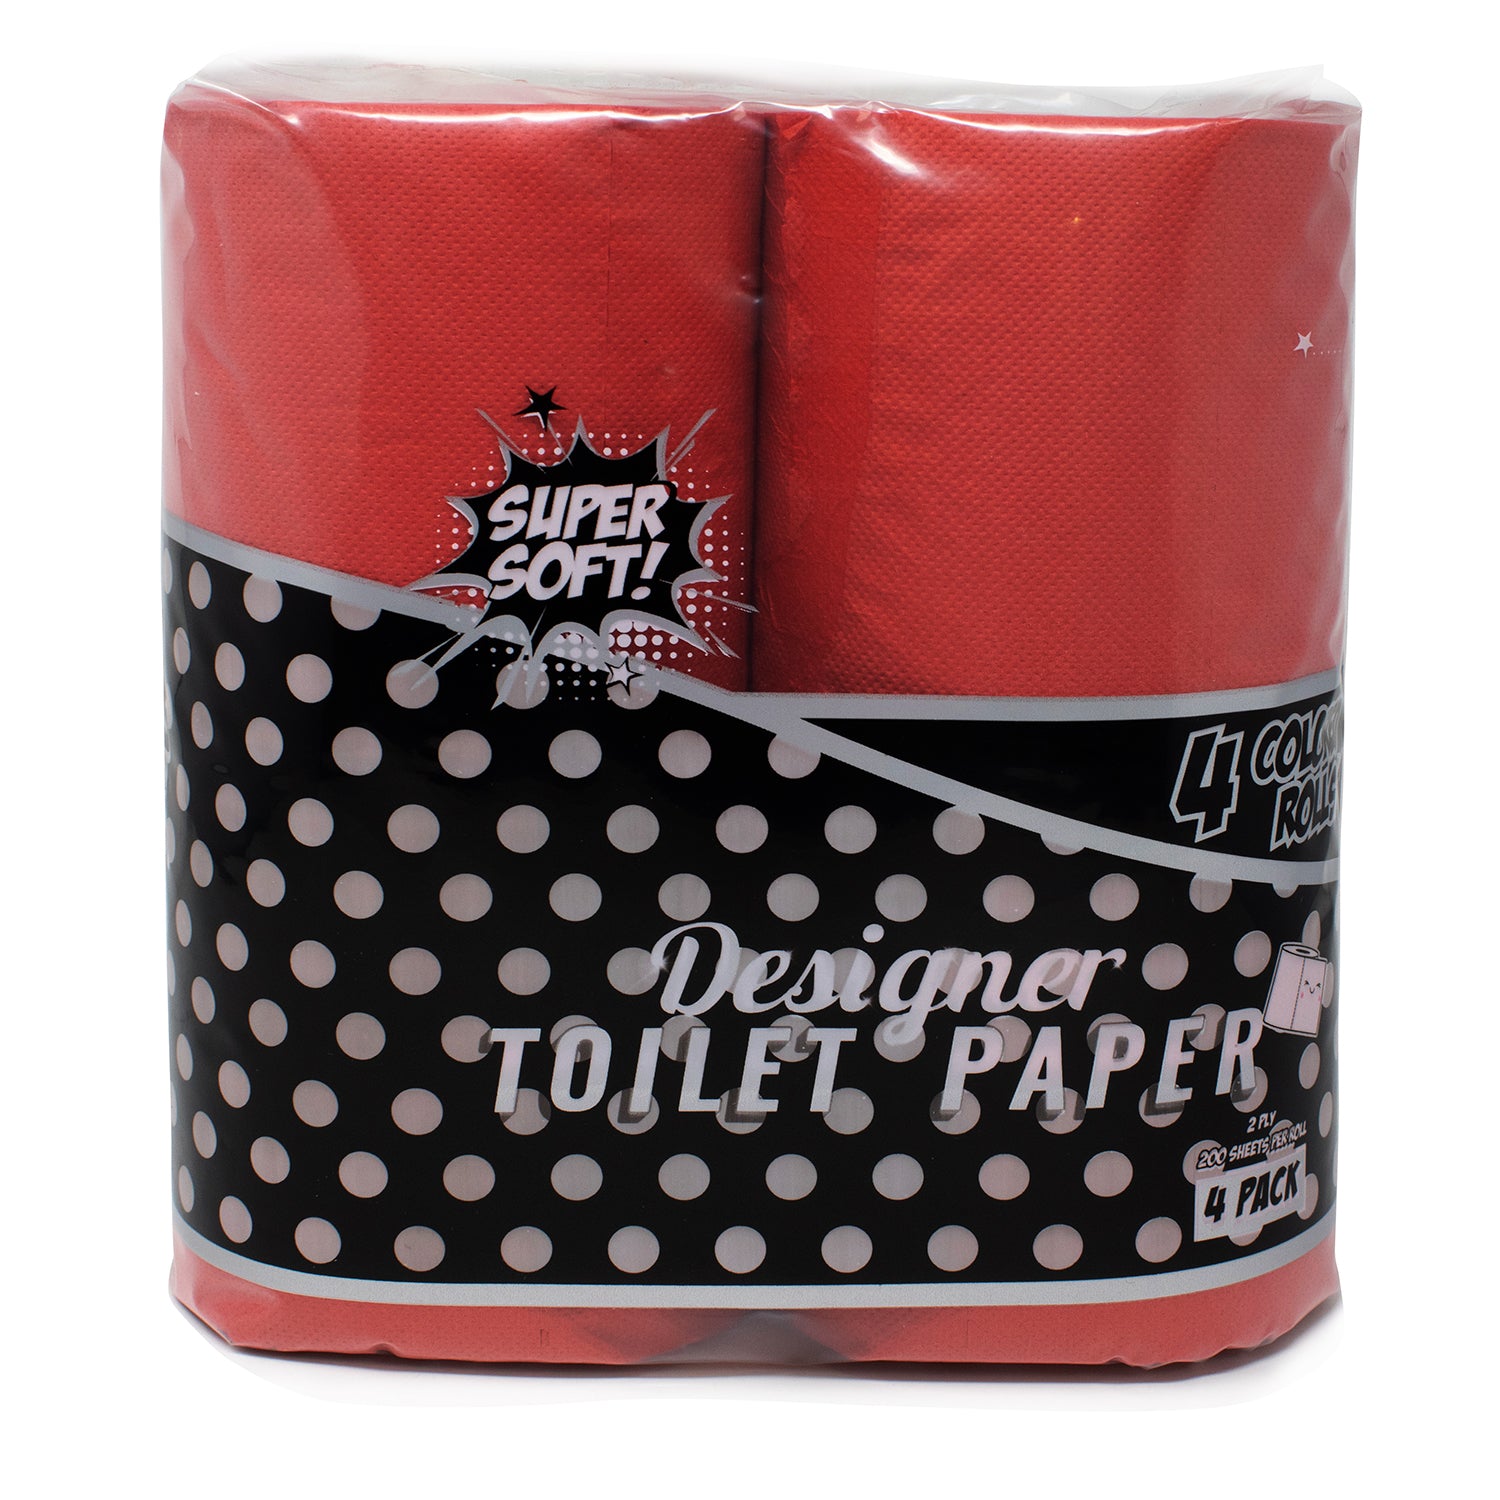 Designer Colored Toilet Paper Red. Brighten up your bathroom in a colorful way and make your bathroom a little more exciting. Does not dye, mark or stain on your skin. This collection is made of a 2 ply sheets, adding a style, strength and softness. Flushable and septic-safe for standard sewer and septic systems. Other colors available.